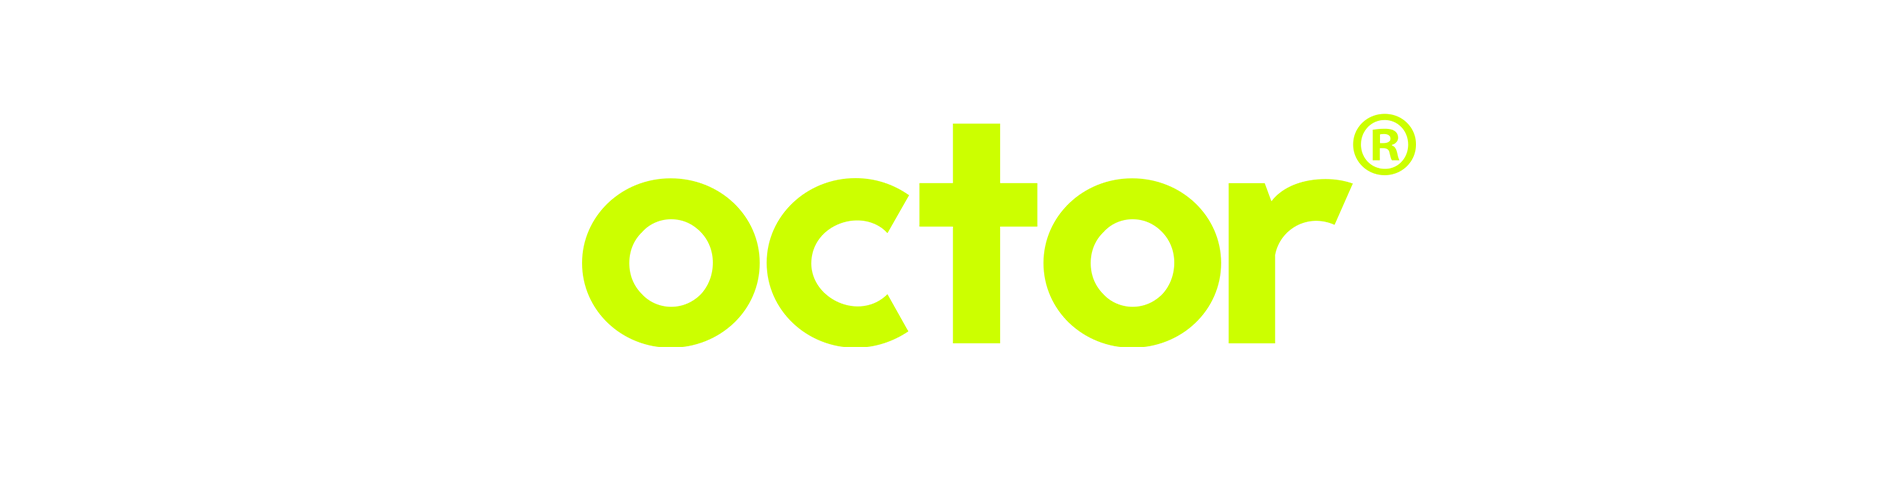 Findoctor Academy